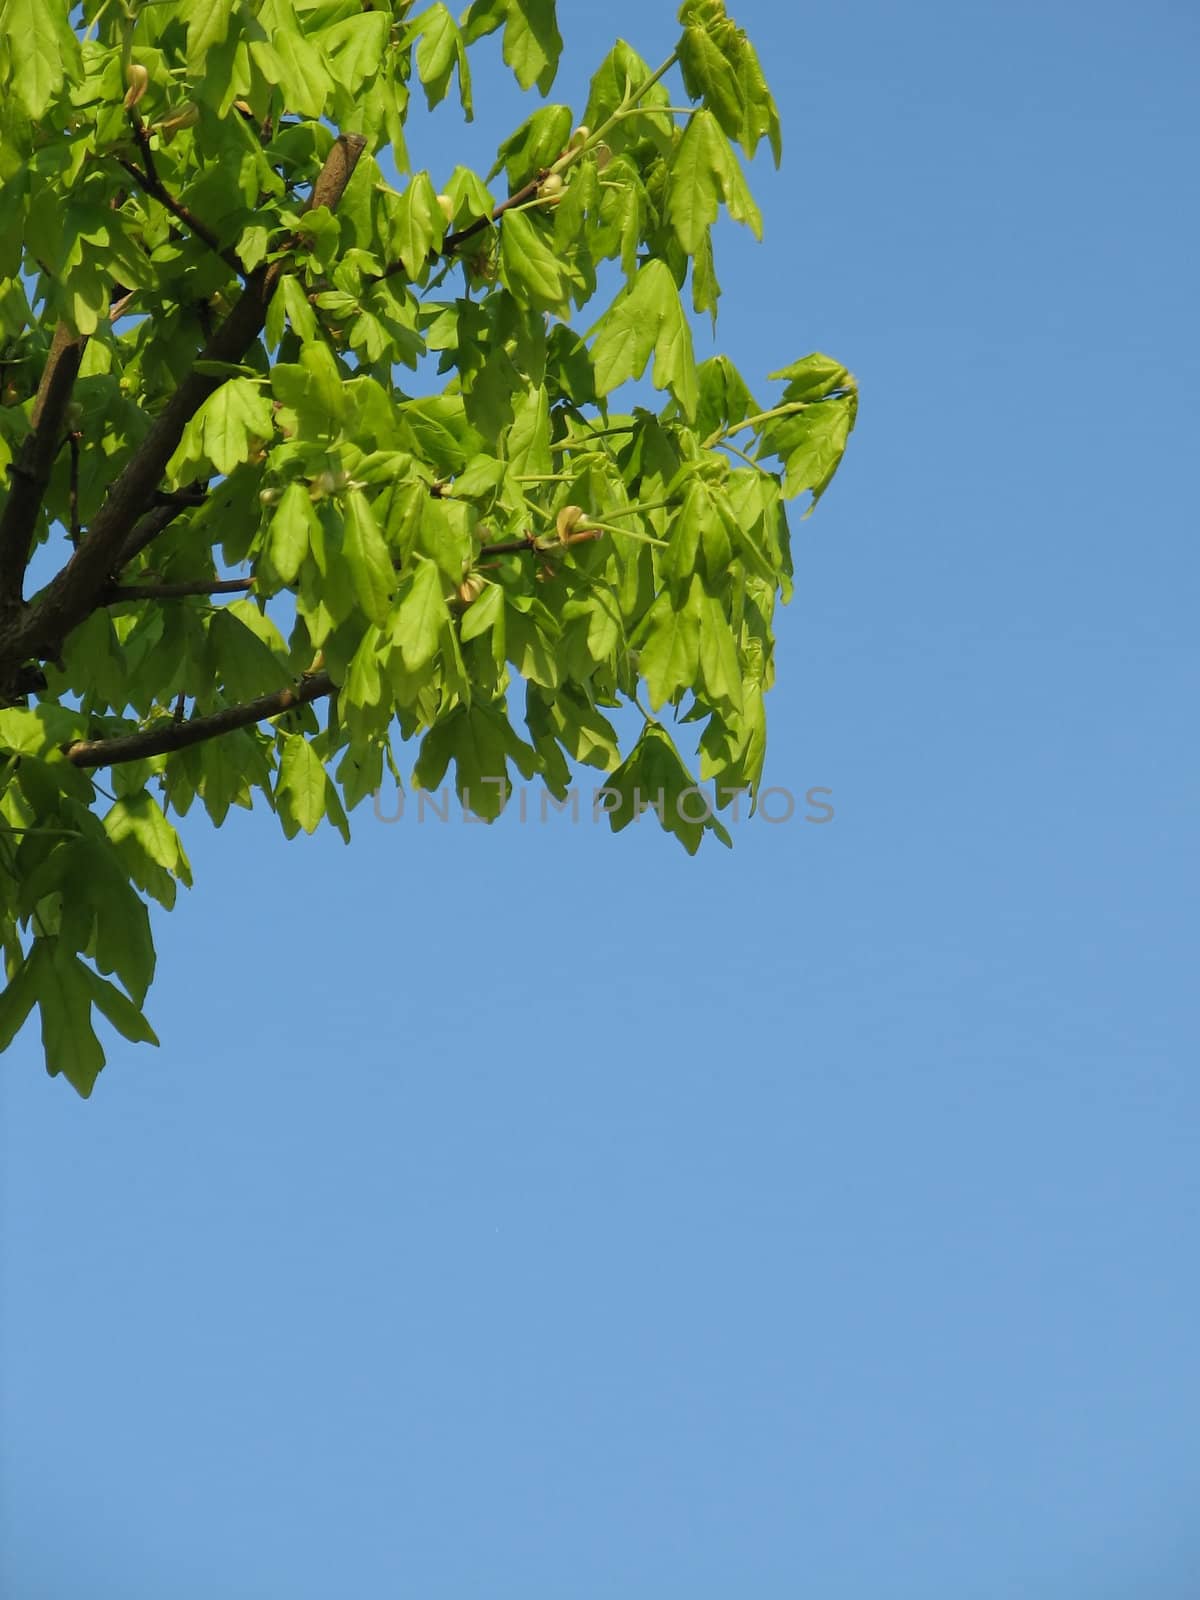 Sky with green leafs, usable as background